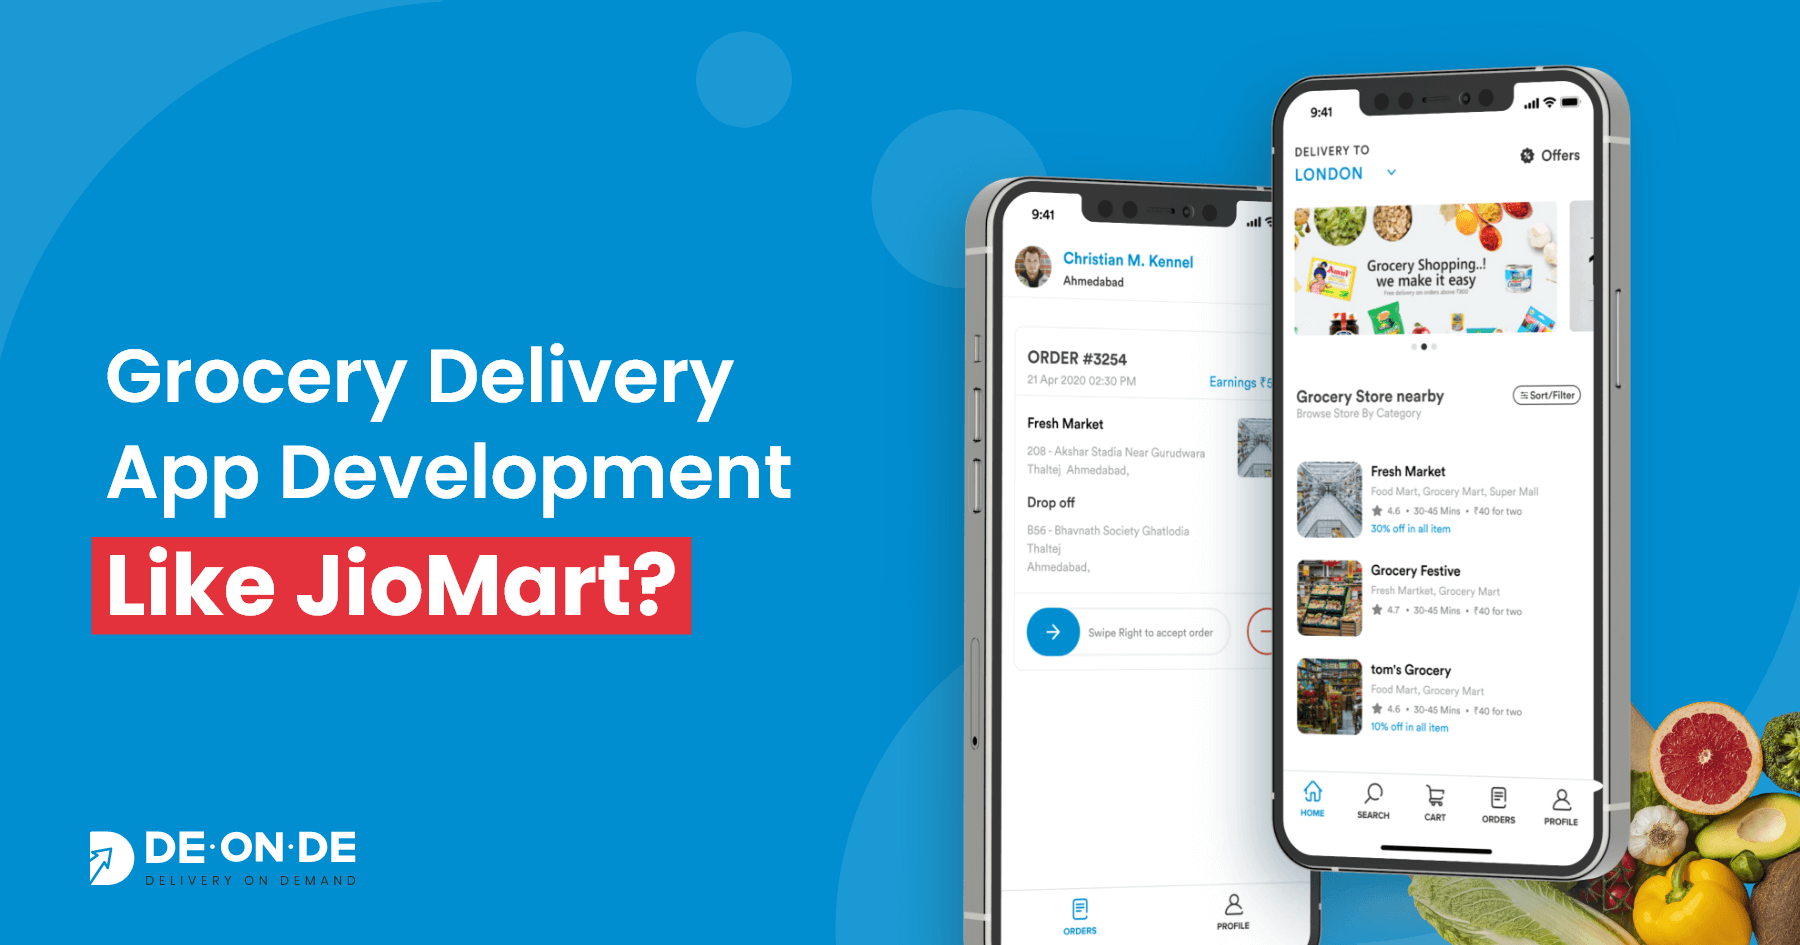 blog-Grocery-Delivery-App-Development-How-to-Make-a-Grocery-App-Like-JioMart.png